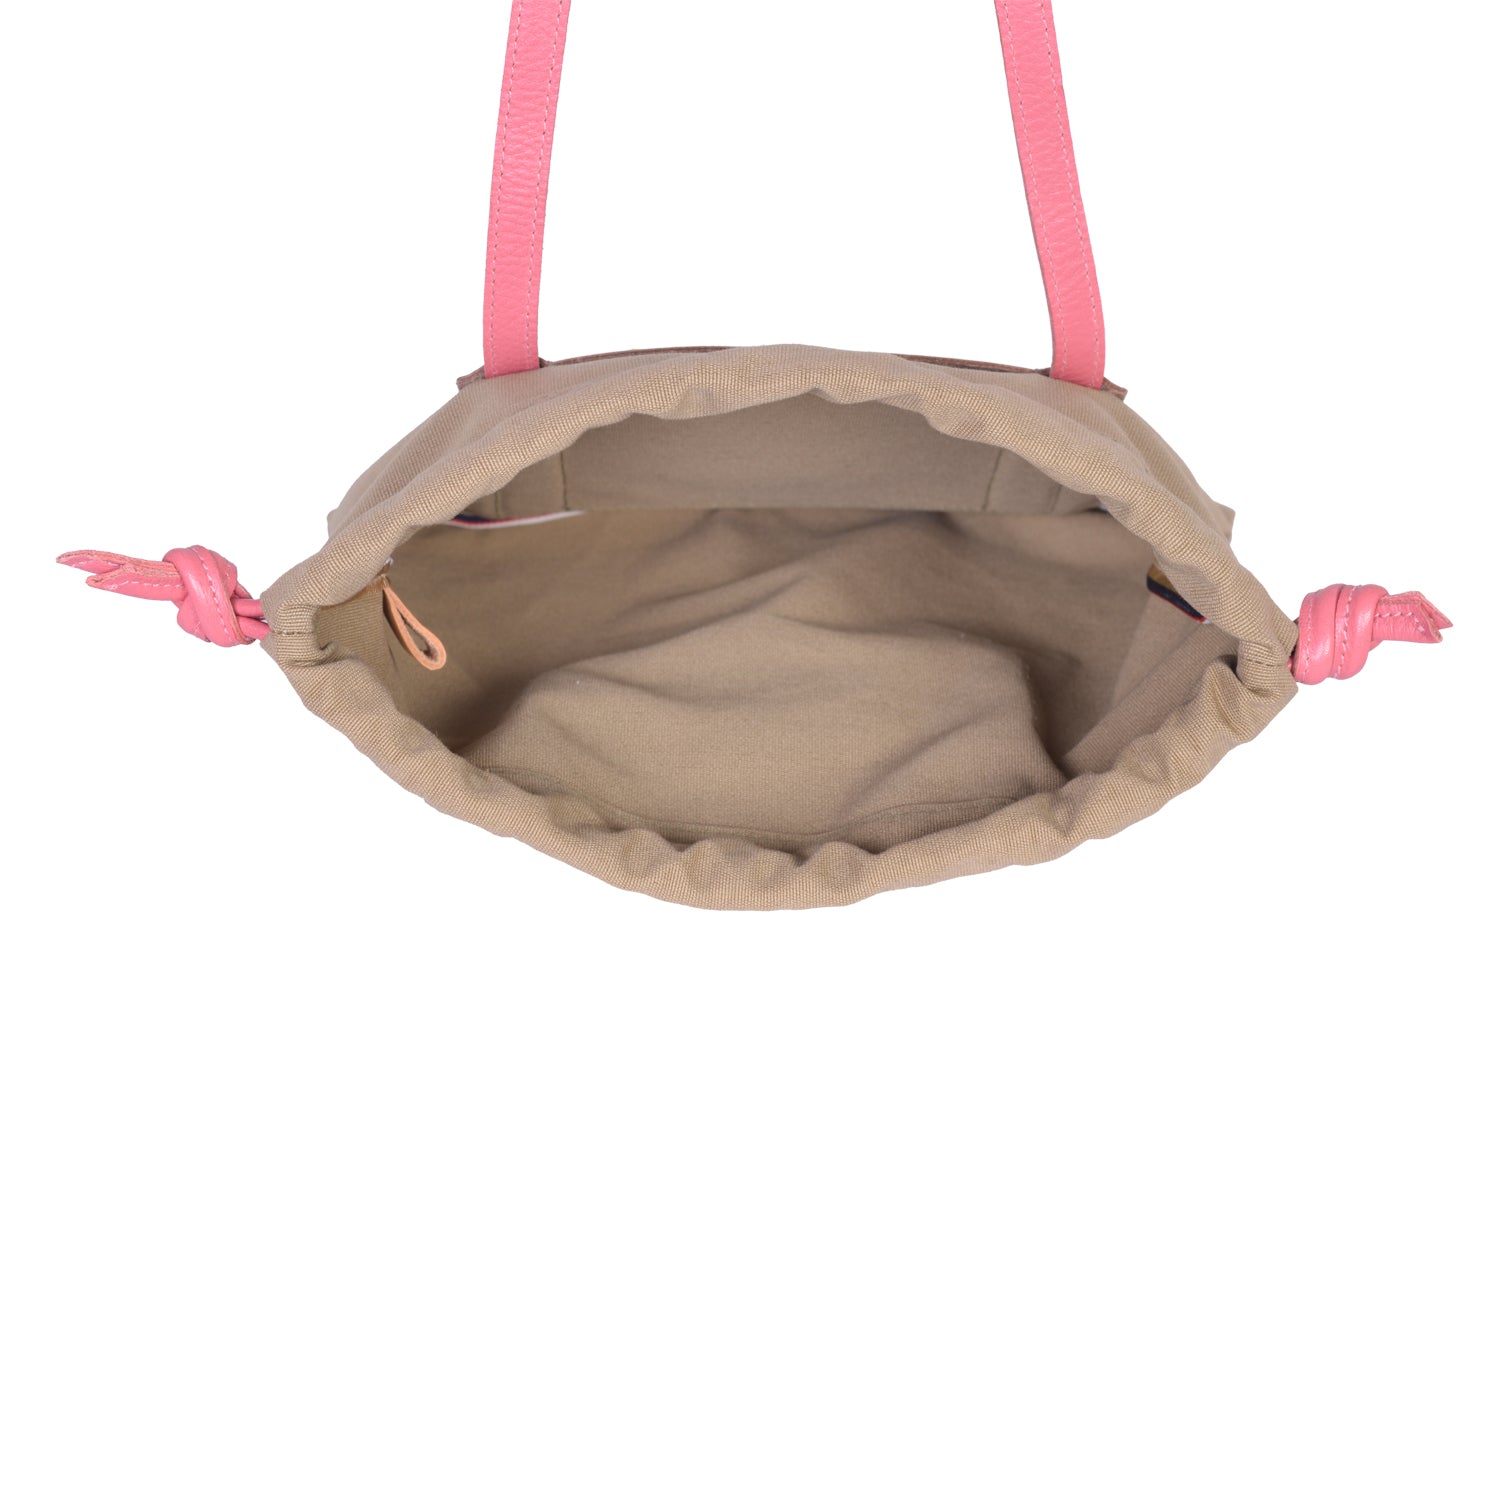 IL BISONTE  CASUAL WOMEN'S DRAWSTRING TOTE BAG IN BEIGE CANVAS